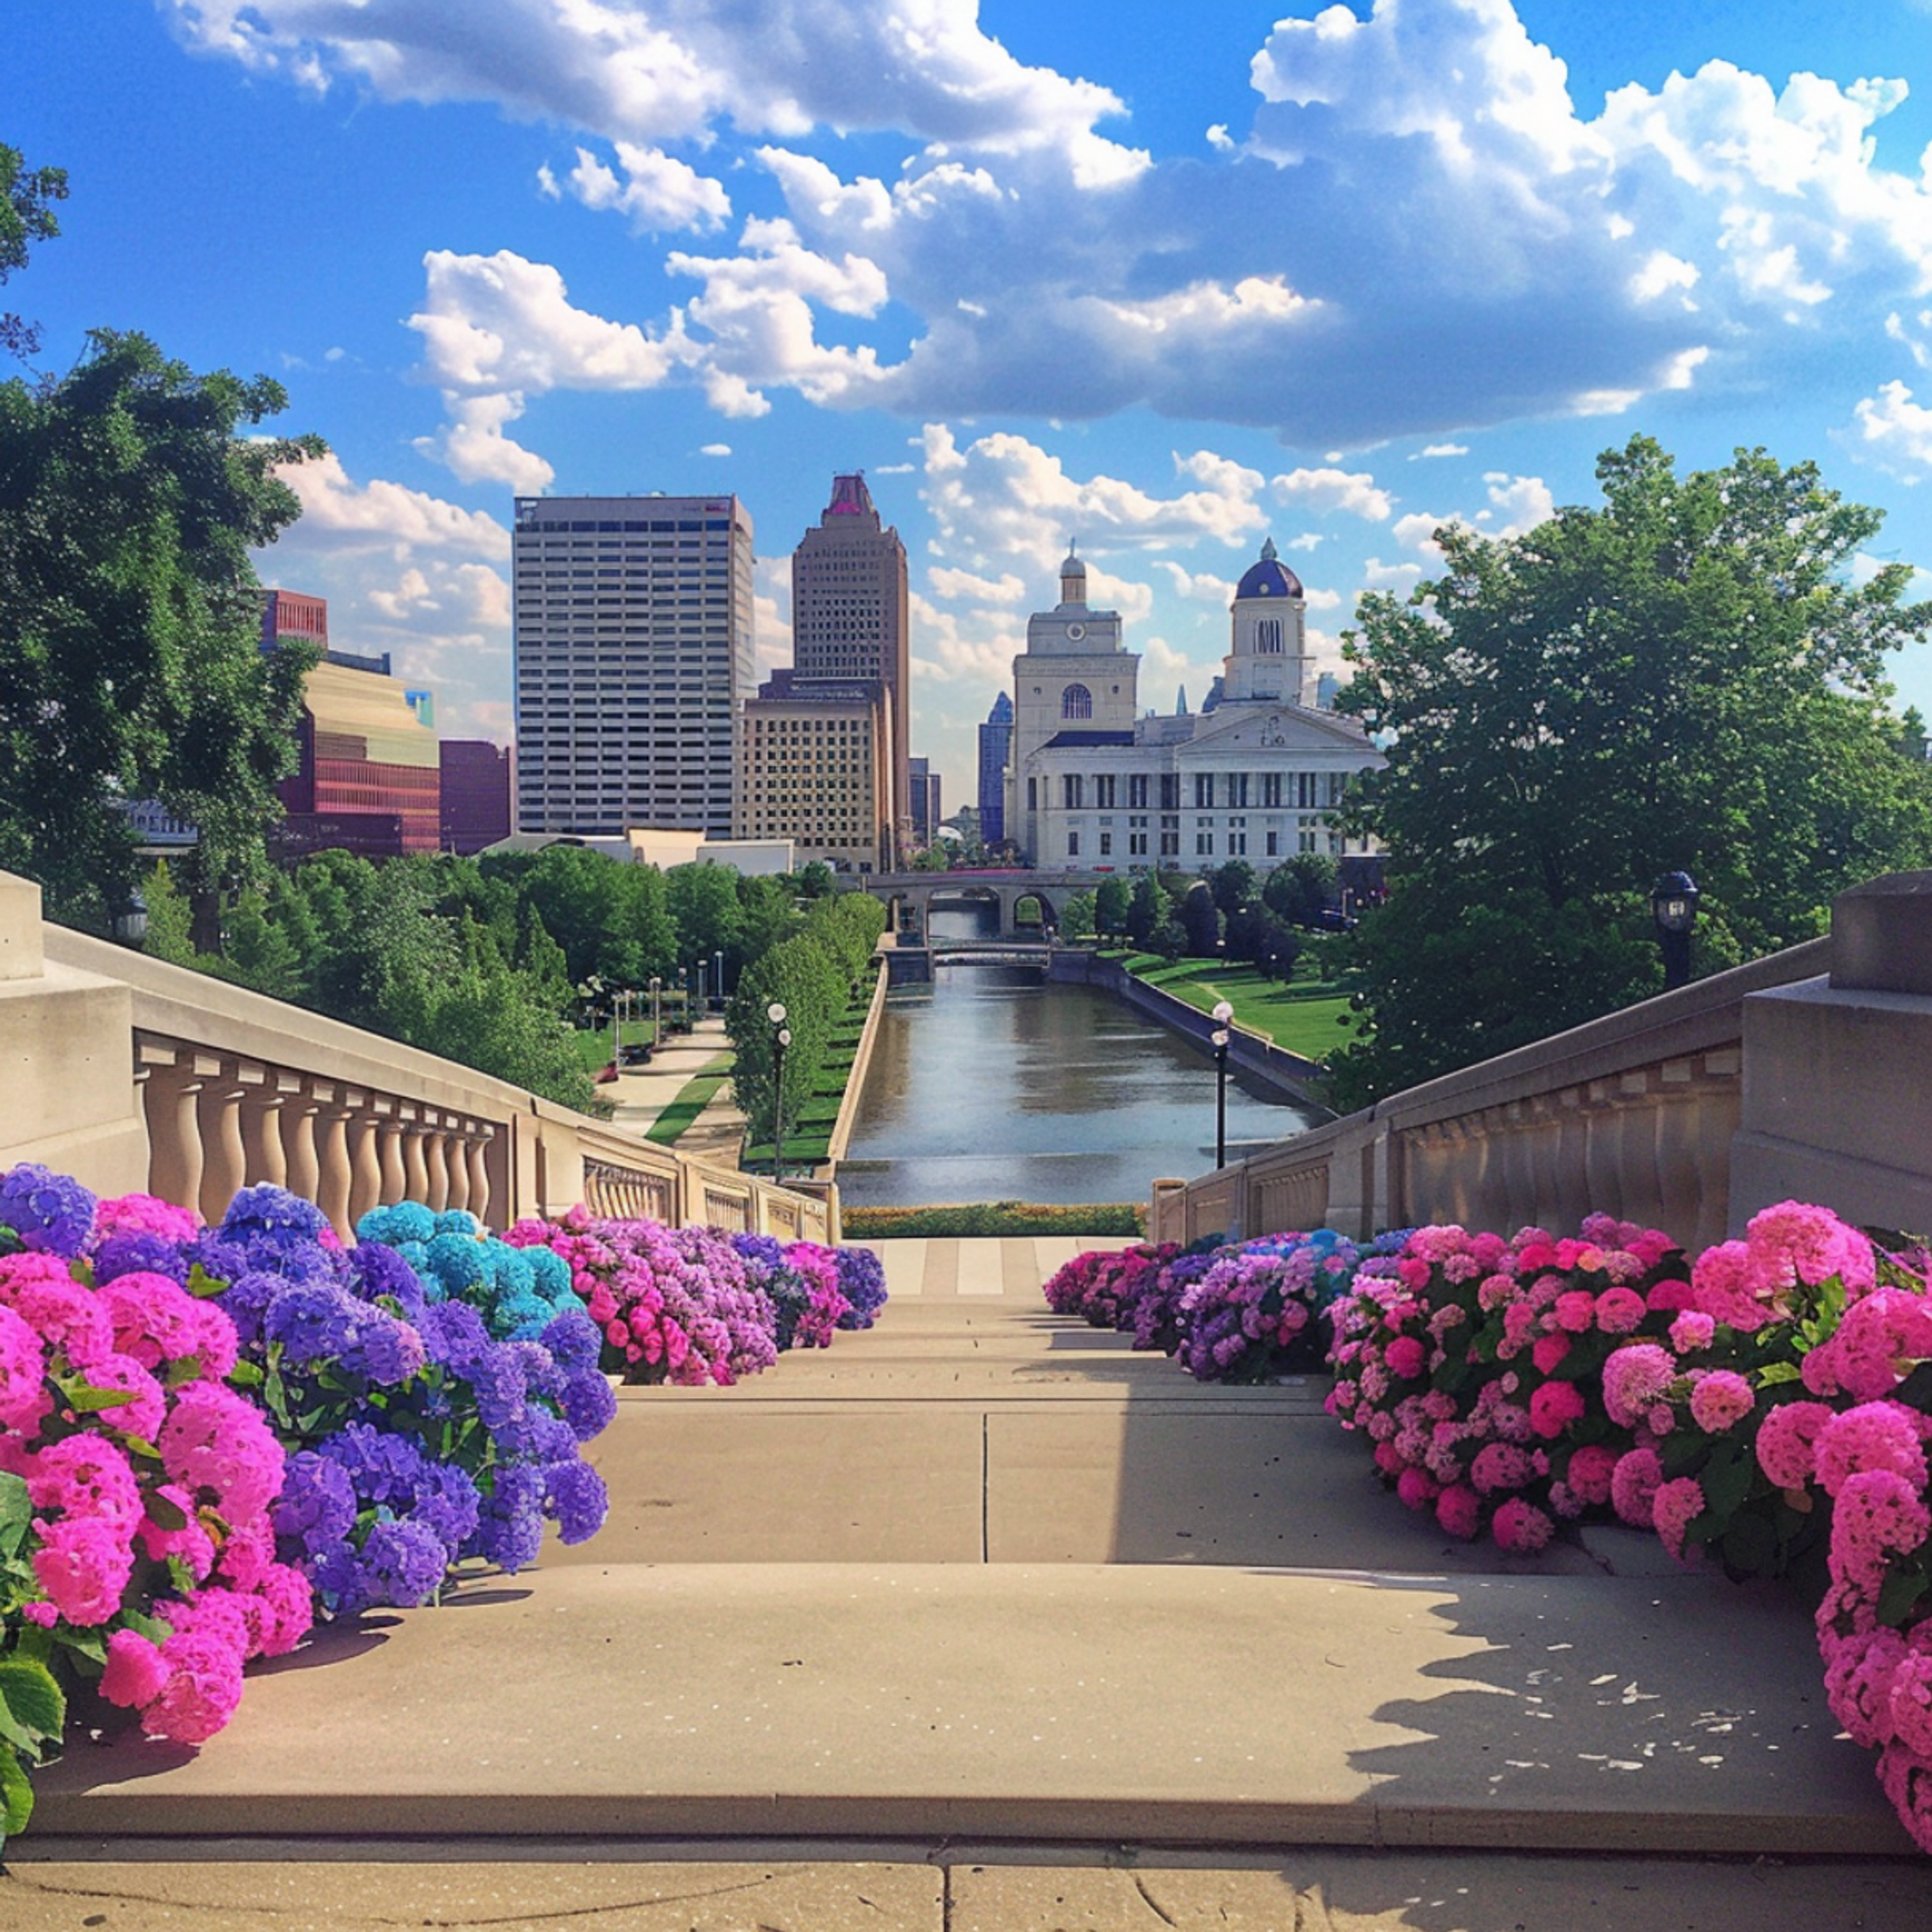 Sunny day in Columbus, Ohio, with a view down the grand staircase lined with vibrant hydrangeas leading to the Scioto River, with the cityscape and the Ohio Statehouse in the distance.